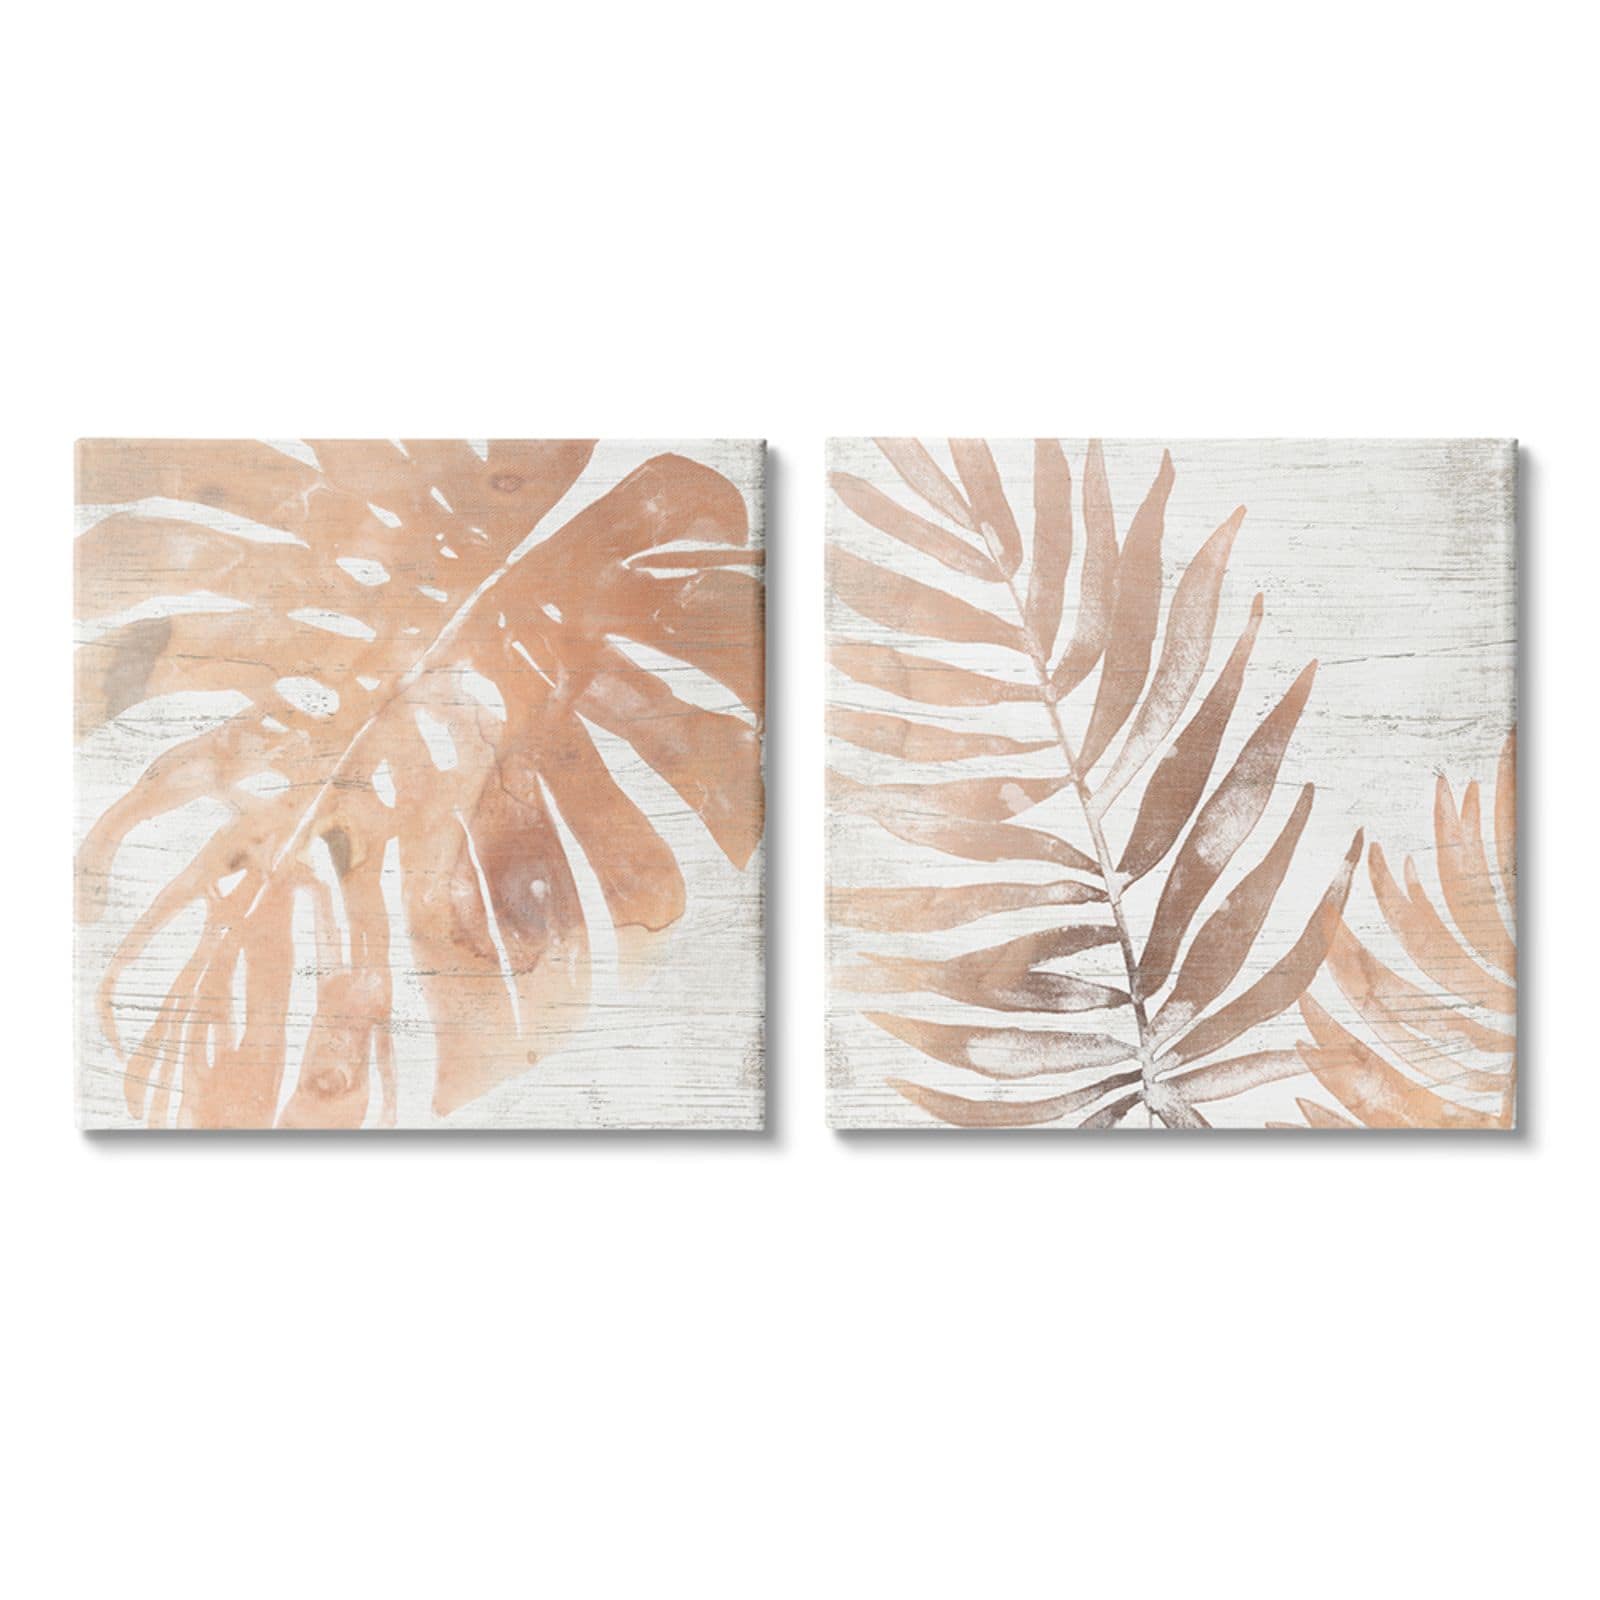 Stupell Industries Orange Palm Leaves over Rustic Distressed Pattern Canvas Wall Art Set